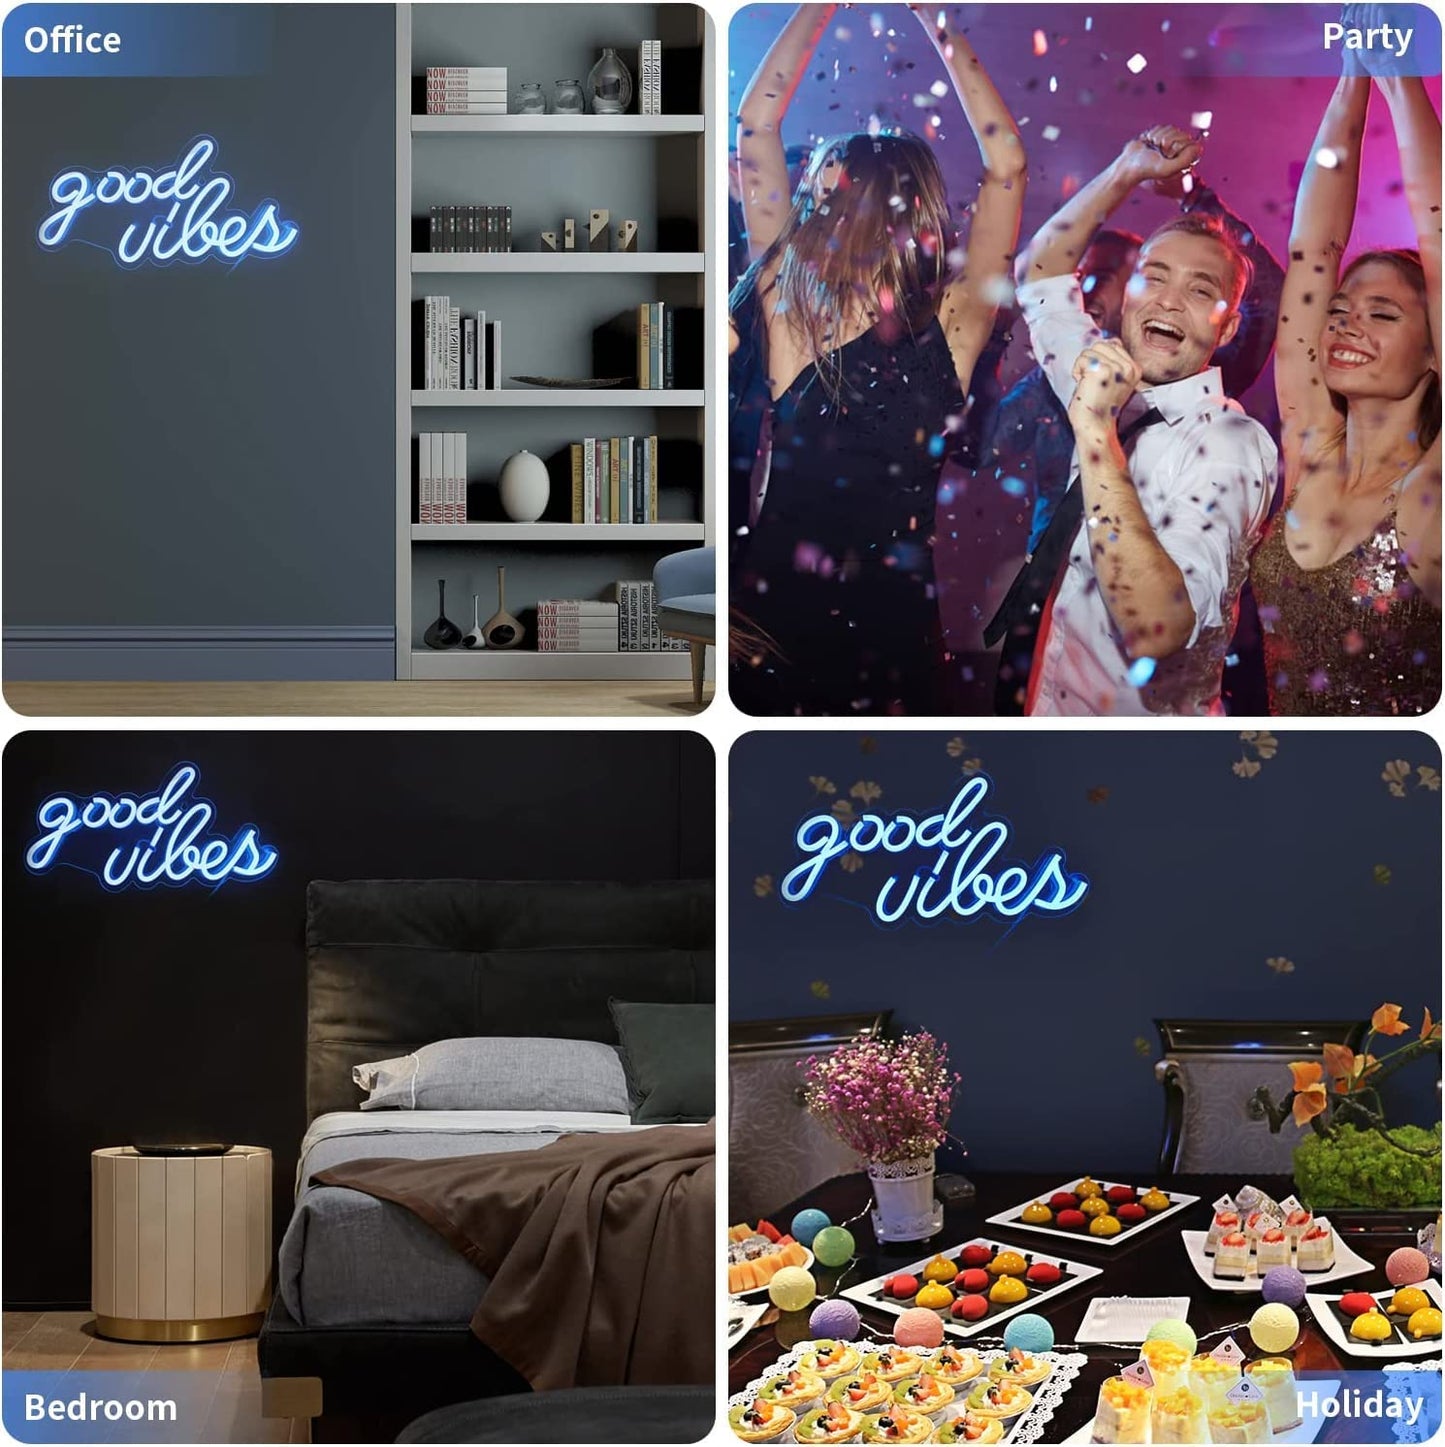 Good Vibes Neon SignHome Harmony EssentialsHome Harmony EssentialsHome Decor
✔️Light up your home: LED Neon signs for bedroom wall decor are bright. It energizes the mood, enhances the vibe, and electrifies a space with its warm, inviting glGood Vibes Neon Sign for Bedroom Wall Decor Powered by USB Neon Light,